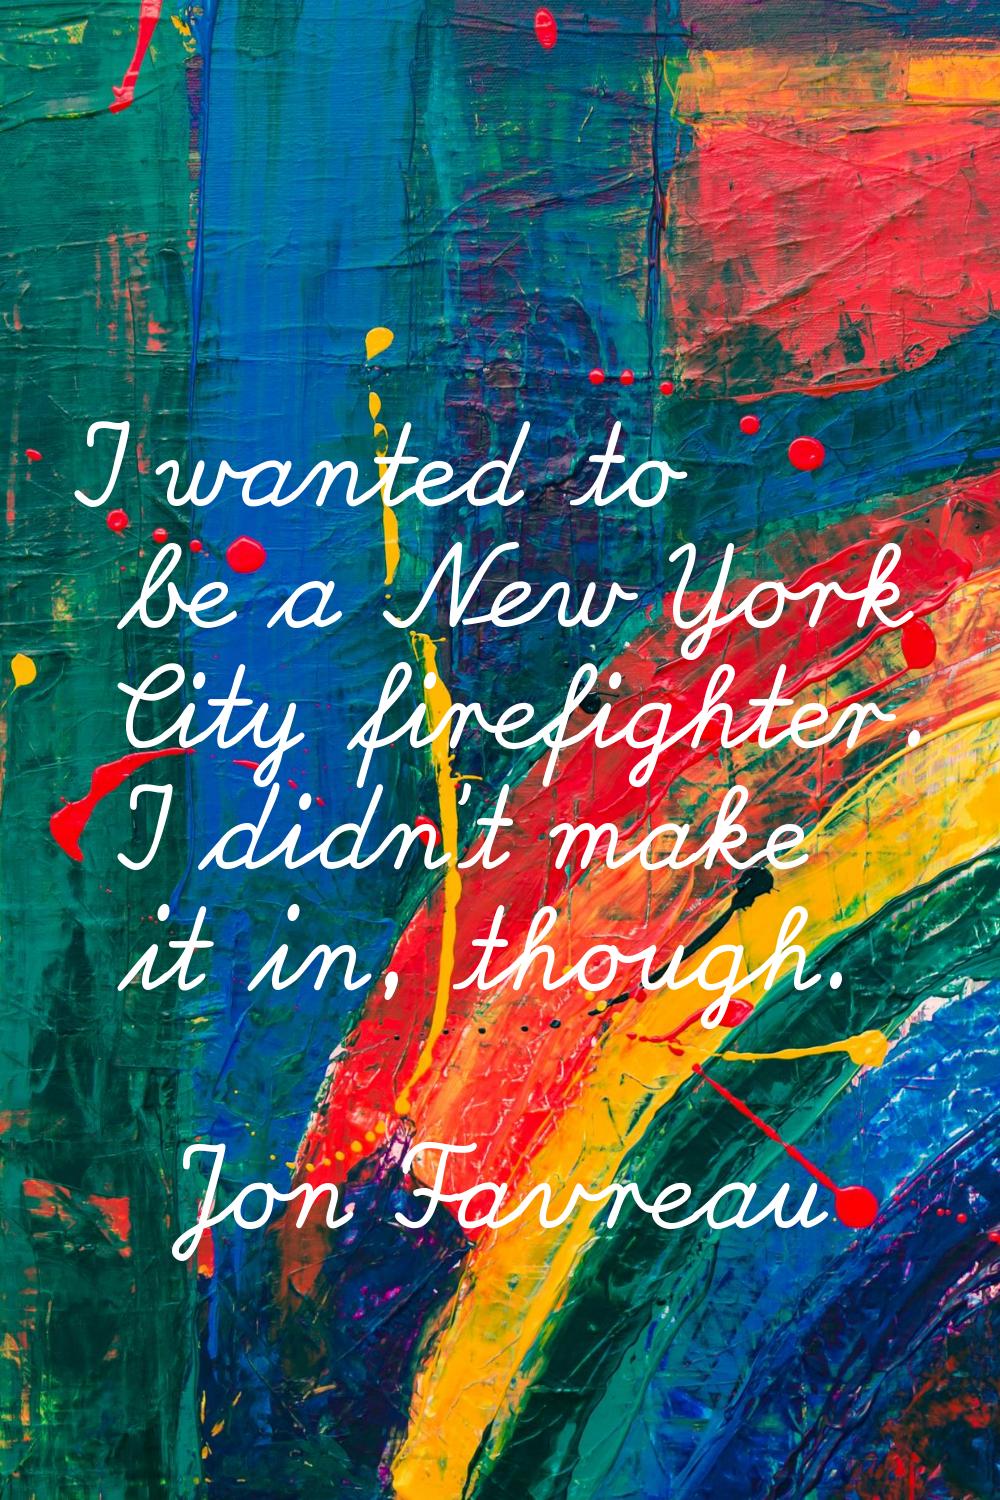 I wanted to be a New York City firefighter. I didn't make it in, though.